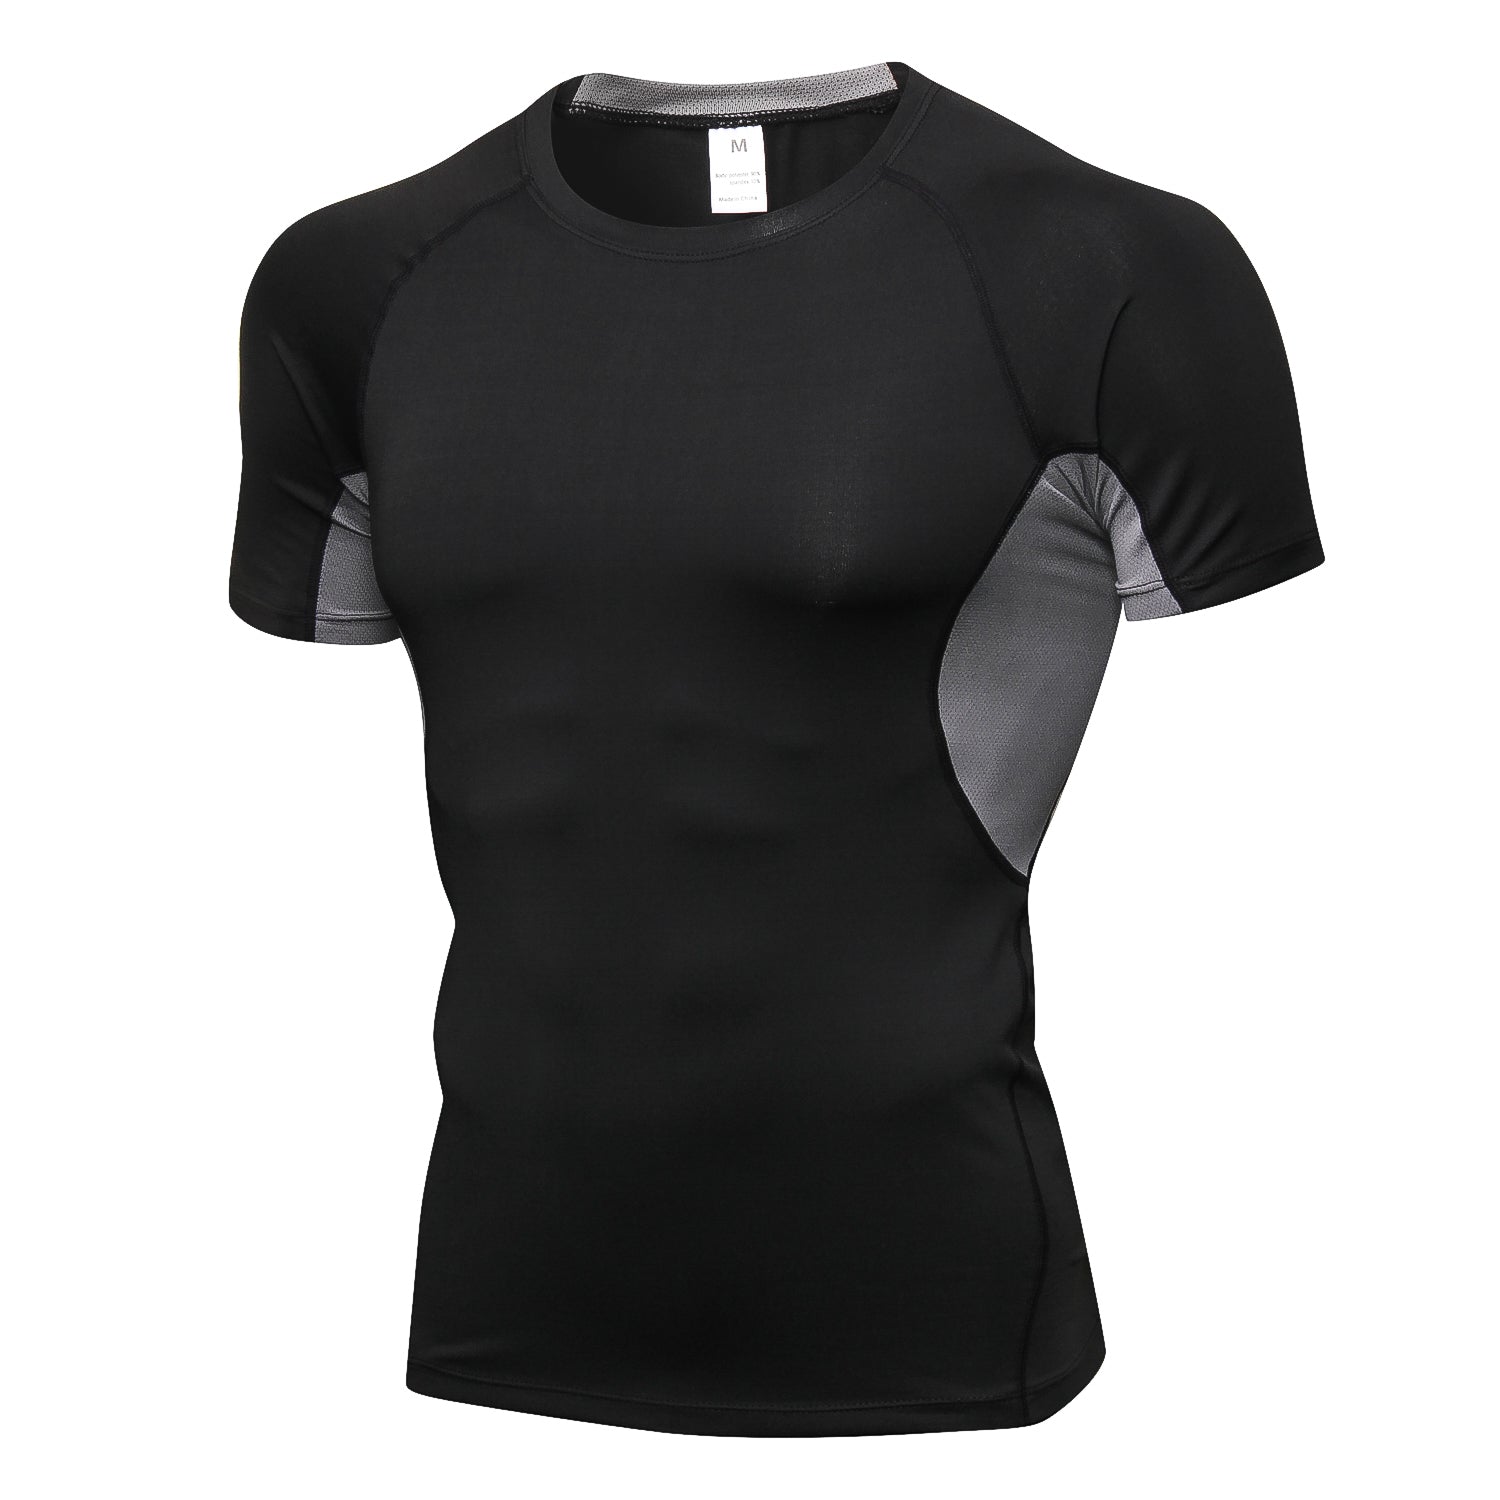 Men's Compression Shirt Gym Workout Athletic Running Basketball Top  Wicking Tee